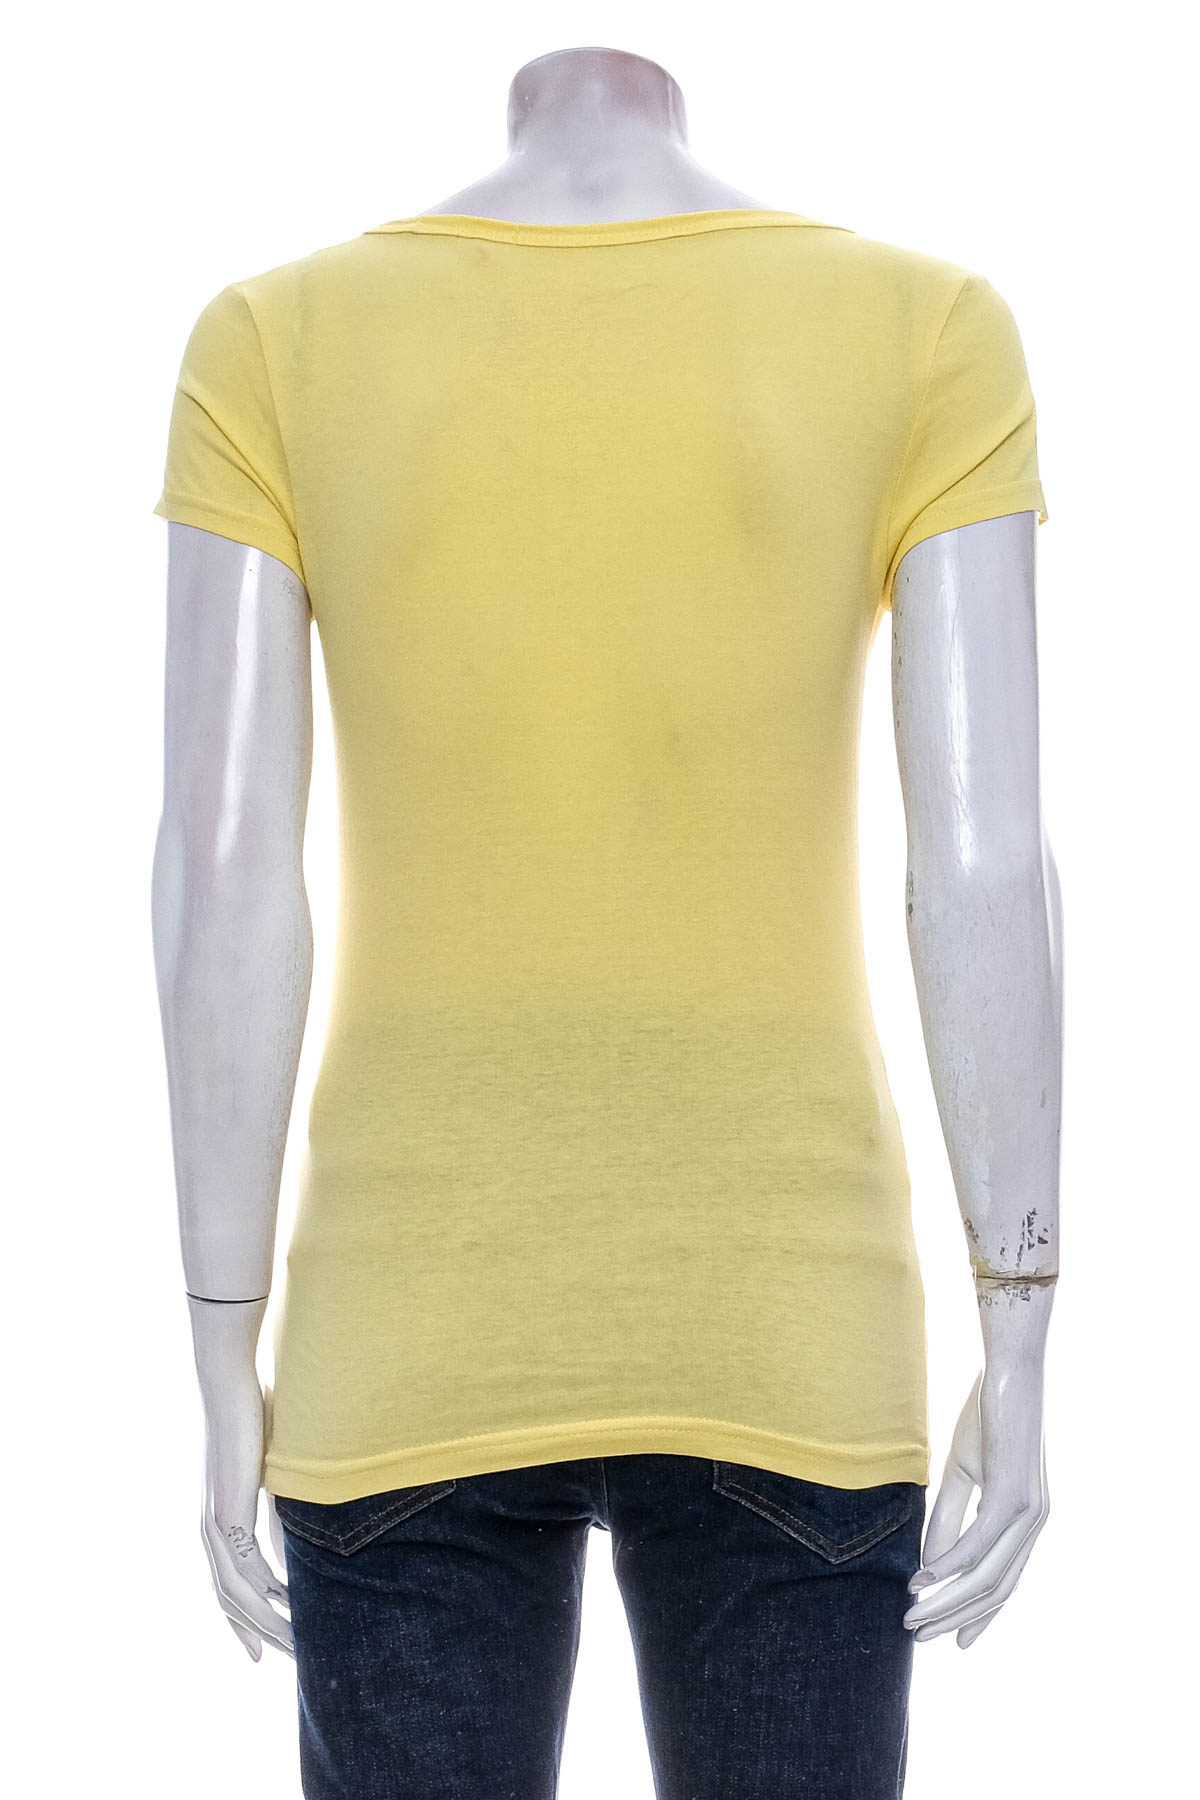 Women's t-shirt - QS by S.Oliver - 1